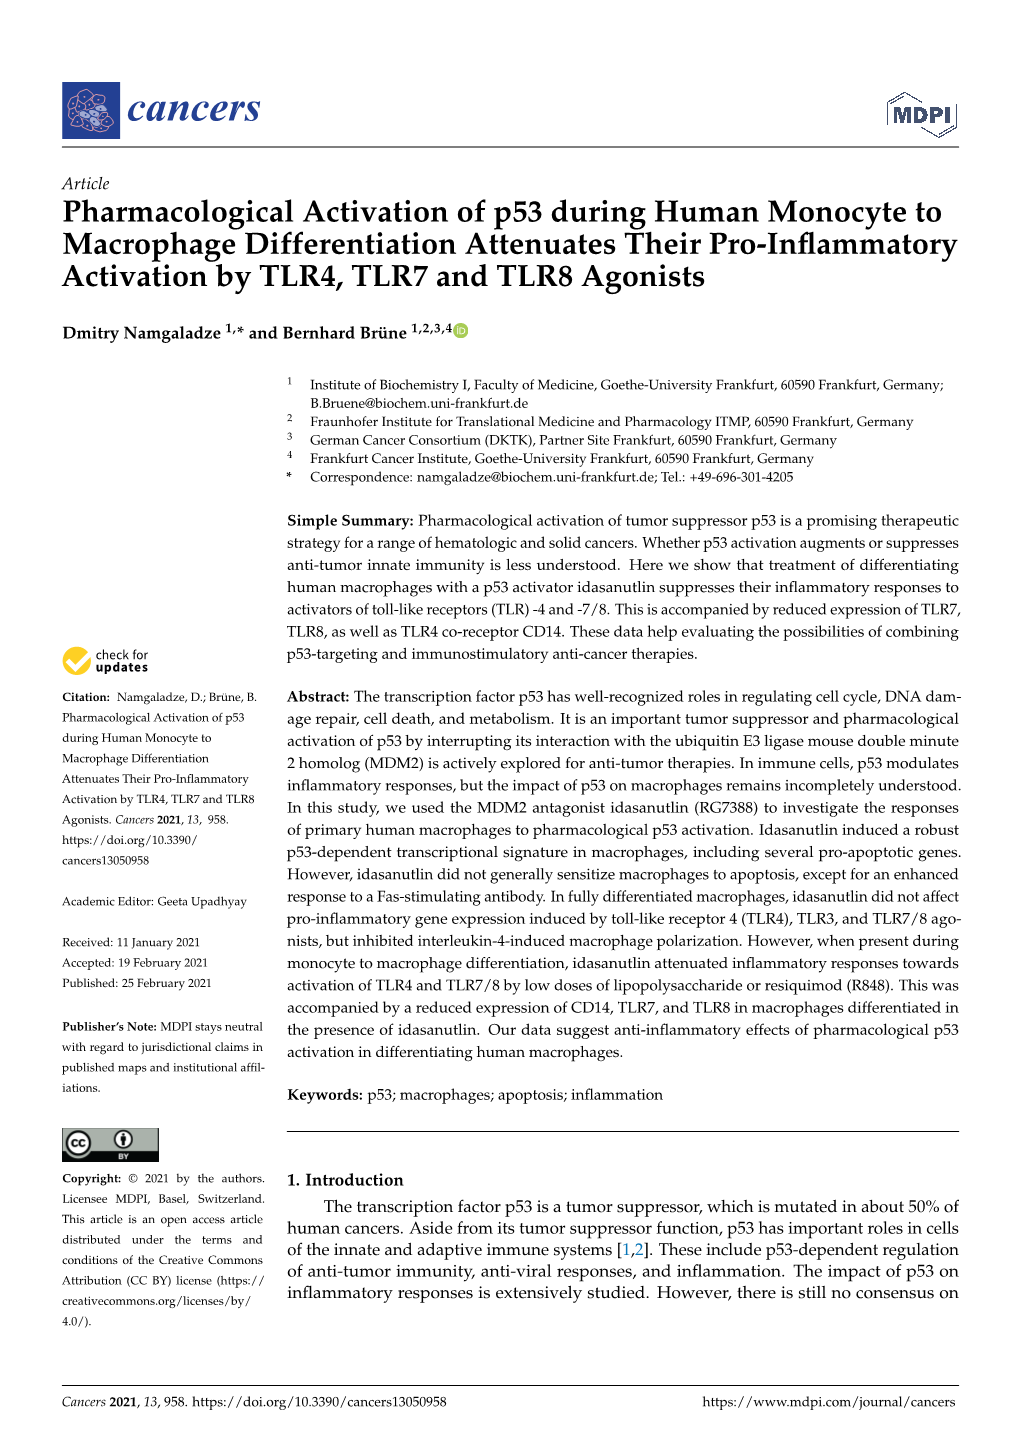 Pharmacological Activation of P53 During Human Monocyte to Macrophage Differentiation Attenuates Their Pro-Inﬂammatory Activation by TLR4, TLR7 and TLR8 Agonists